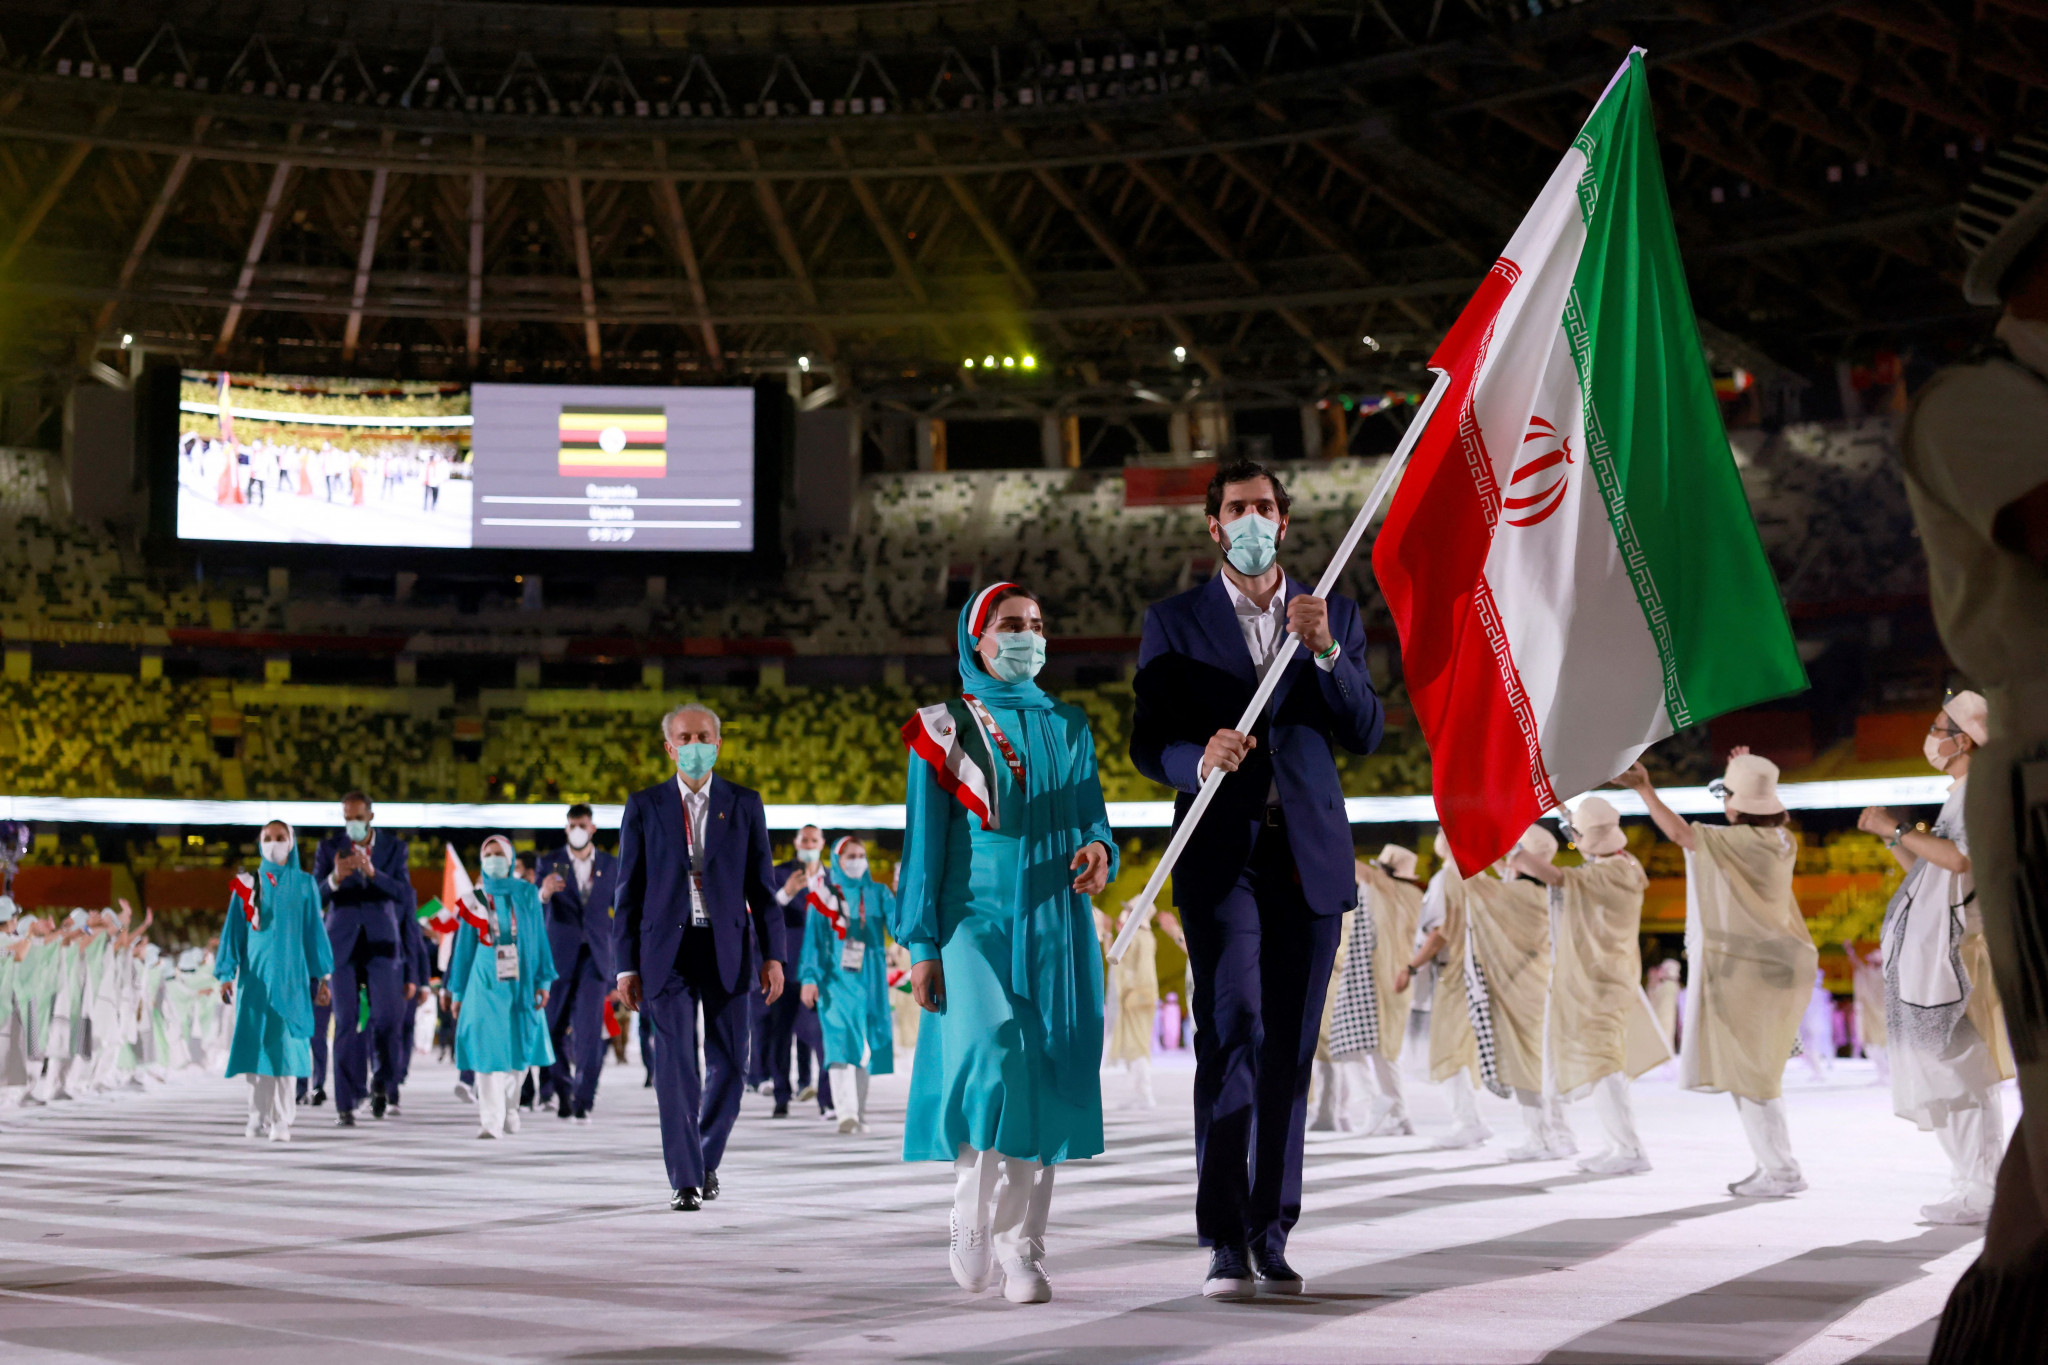 Iran finished sixth on the medals table in the 2018 Asian Games, while finishing fifth in 2014 and fourth in 2010 ©Getty Images